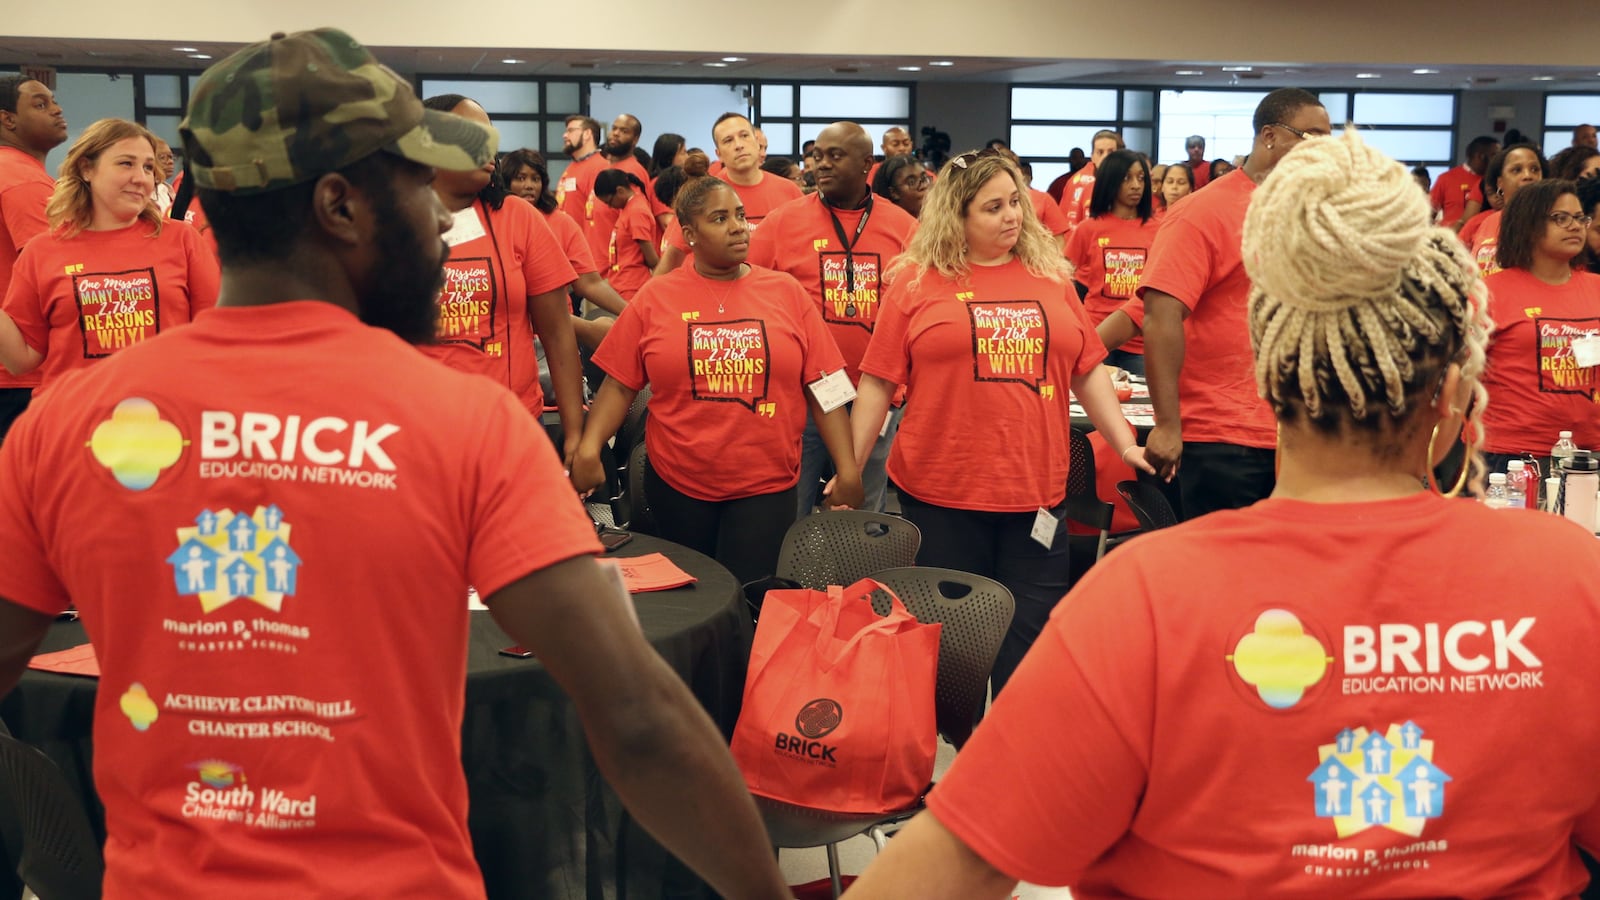 Marion P. Thomas Charter School has brought on a new management group, the BRICK Education Network, to help transform the school. Staffers from the schools that BRICK now oversees gathered for a kickoff event this week.